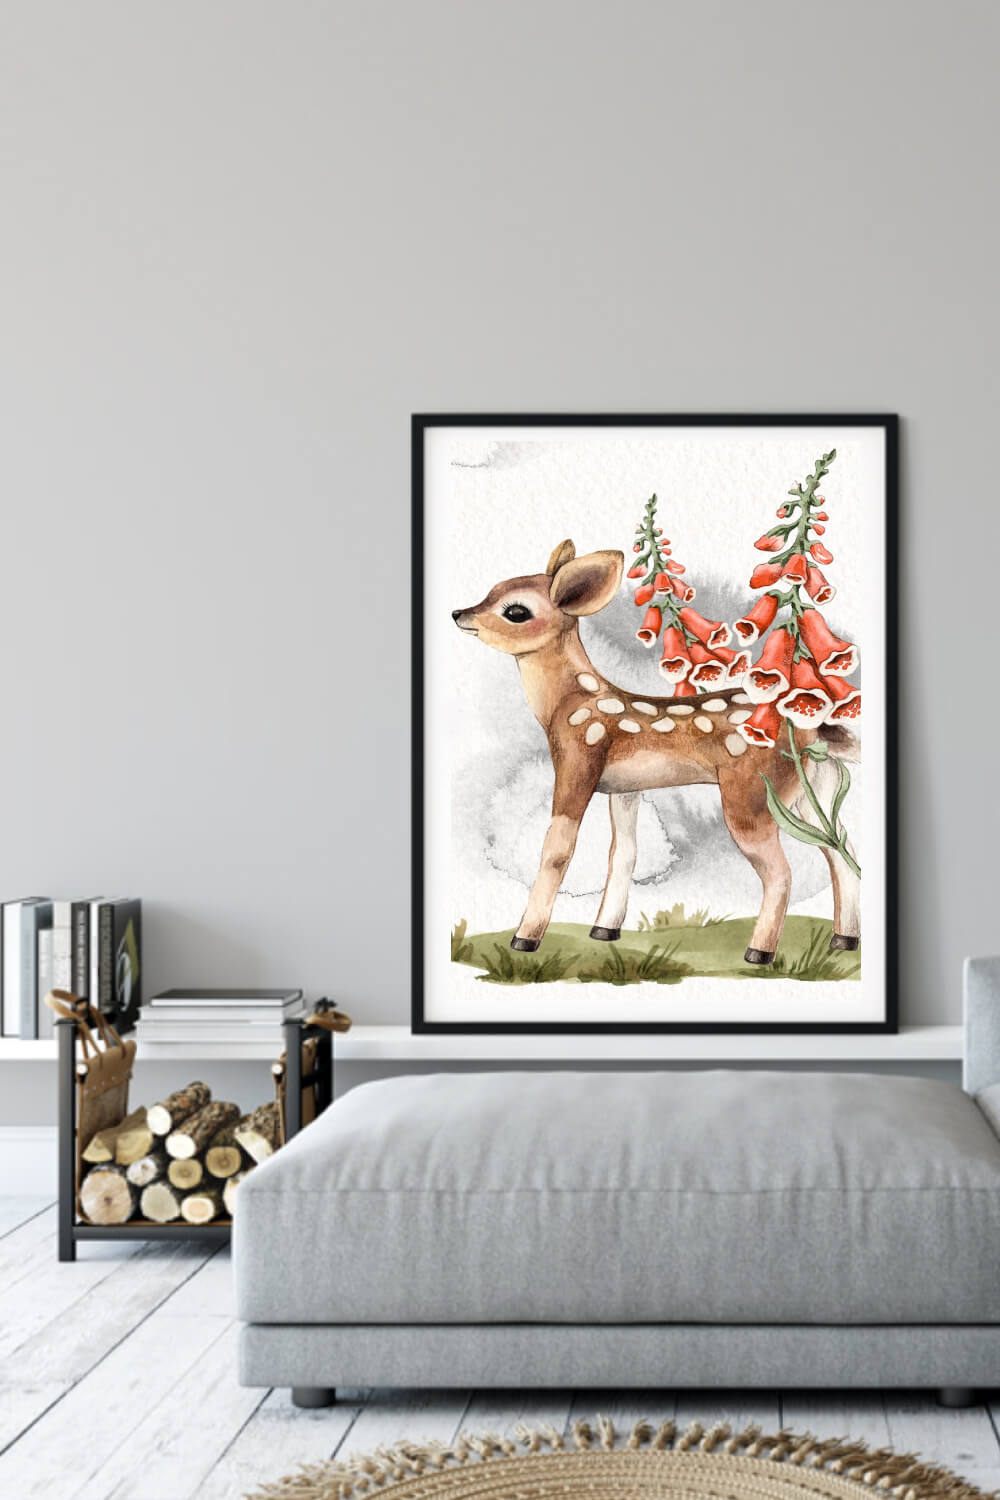 In the gray room there is a large picture in a dark frame with a painted little deer.